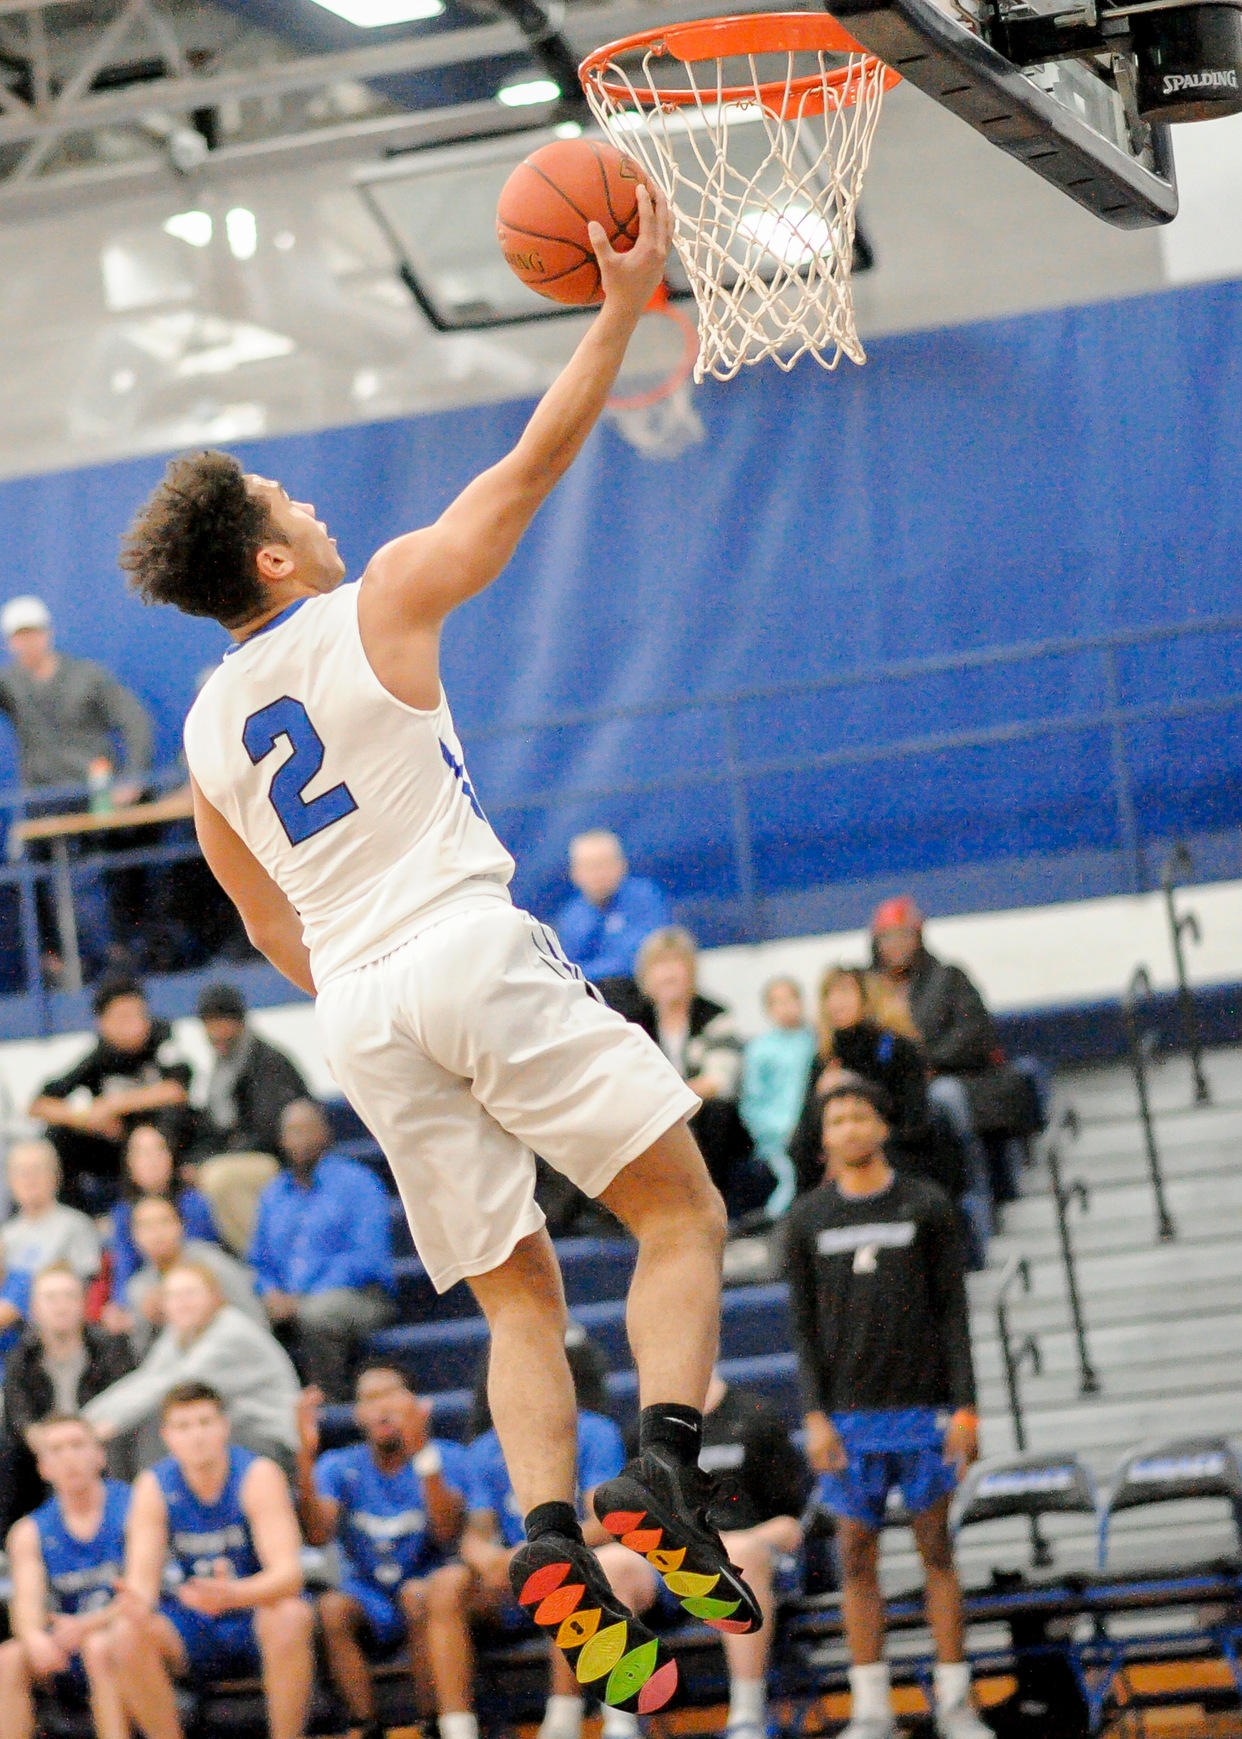 Loss to Iowa Lakes CC ends 10-game winning streak for DMACC men's basketball team